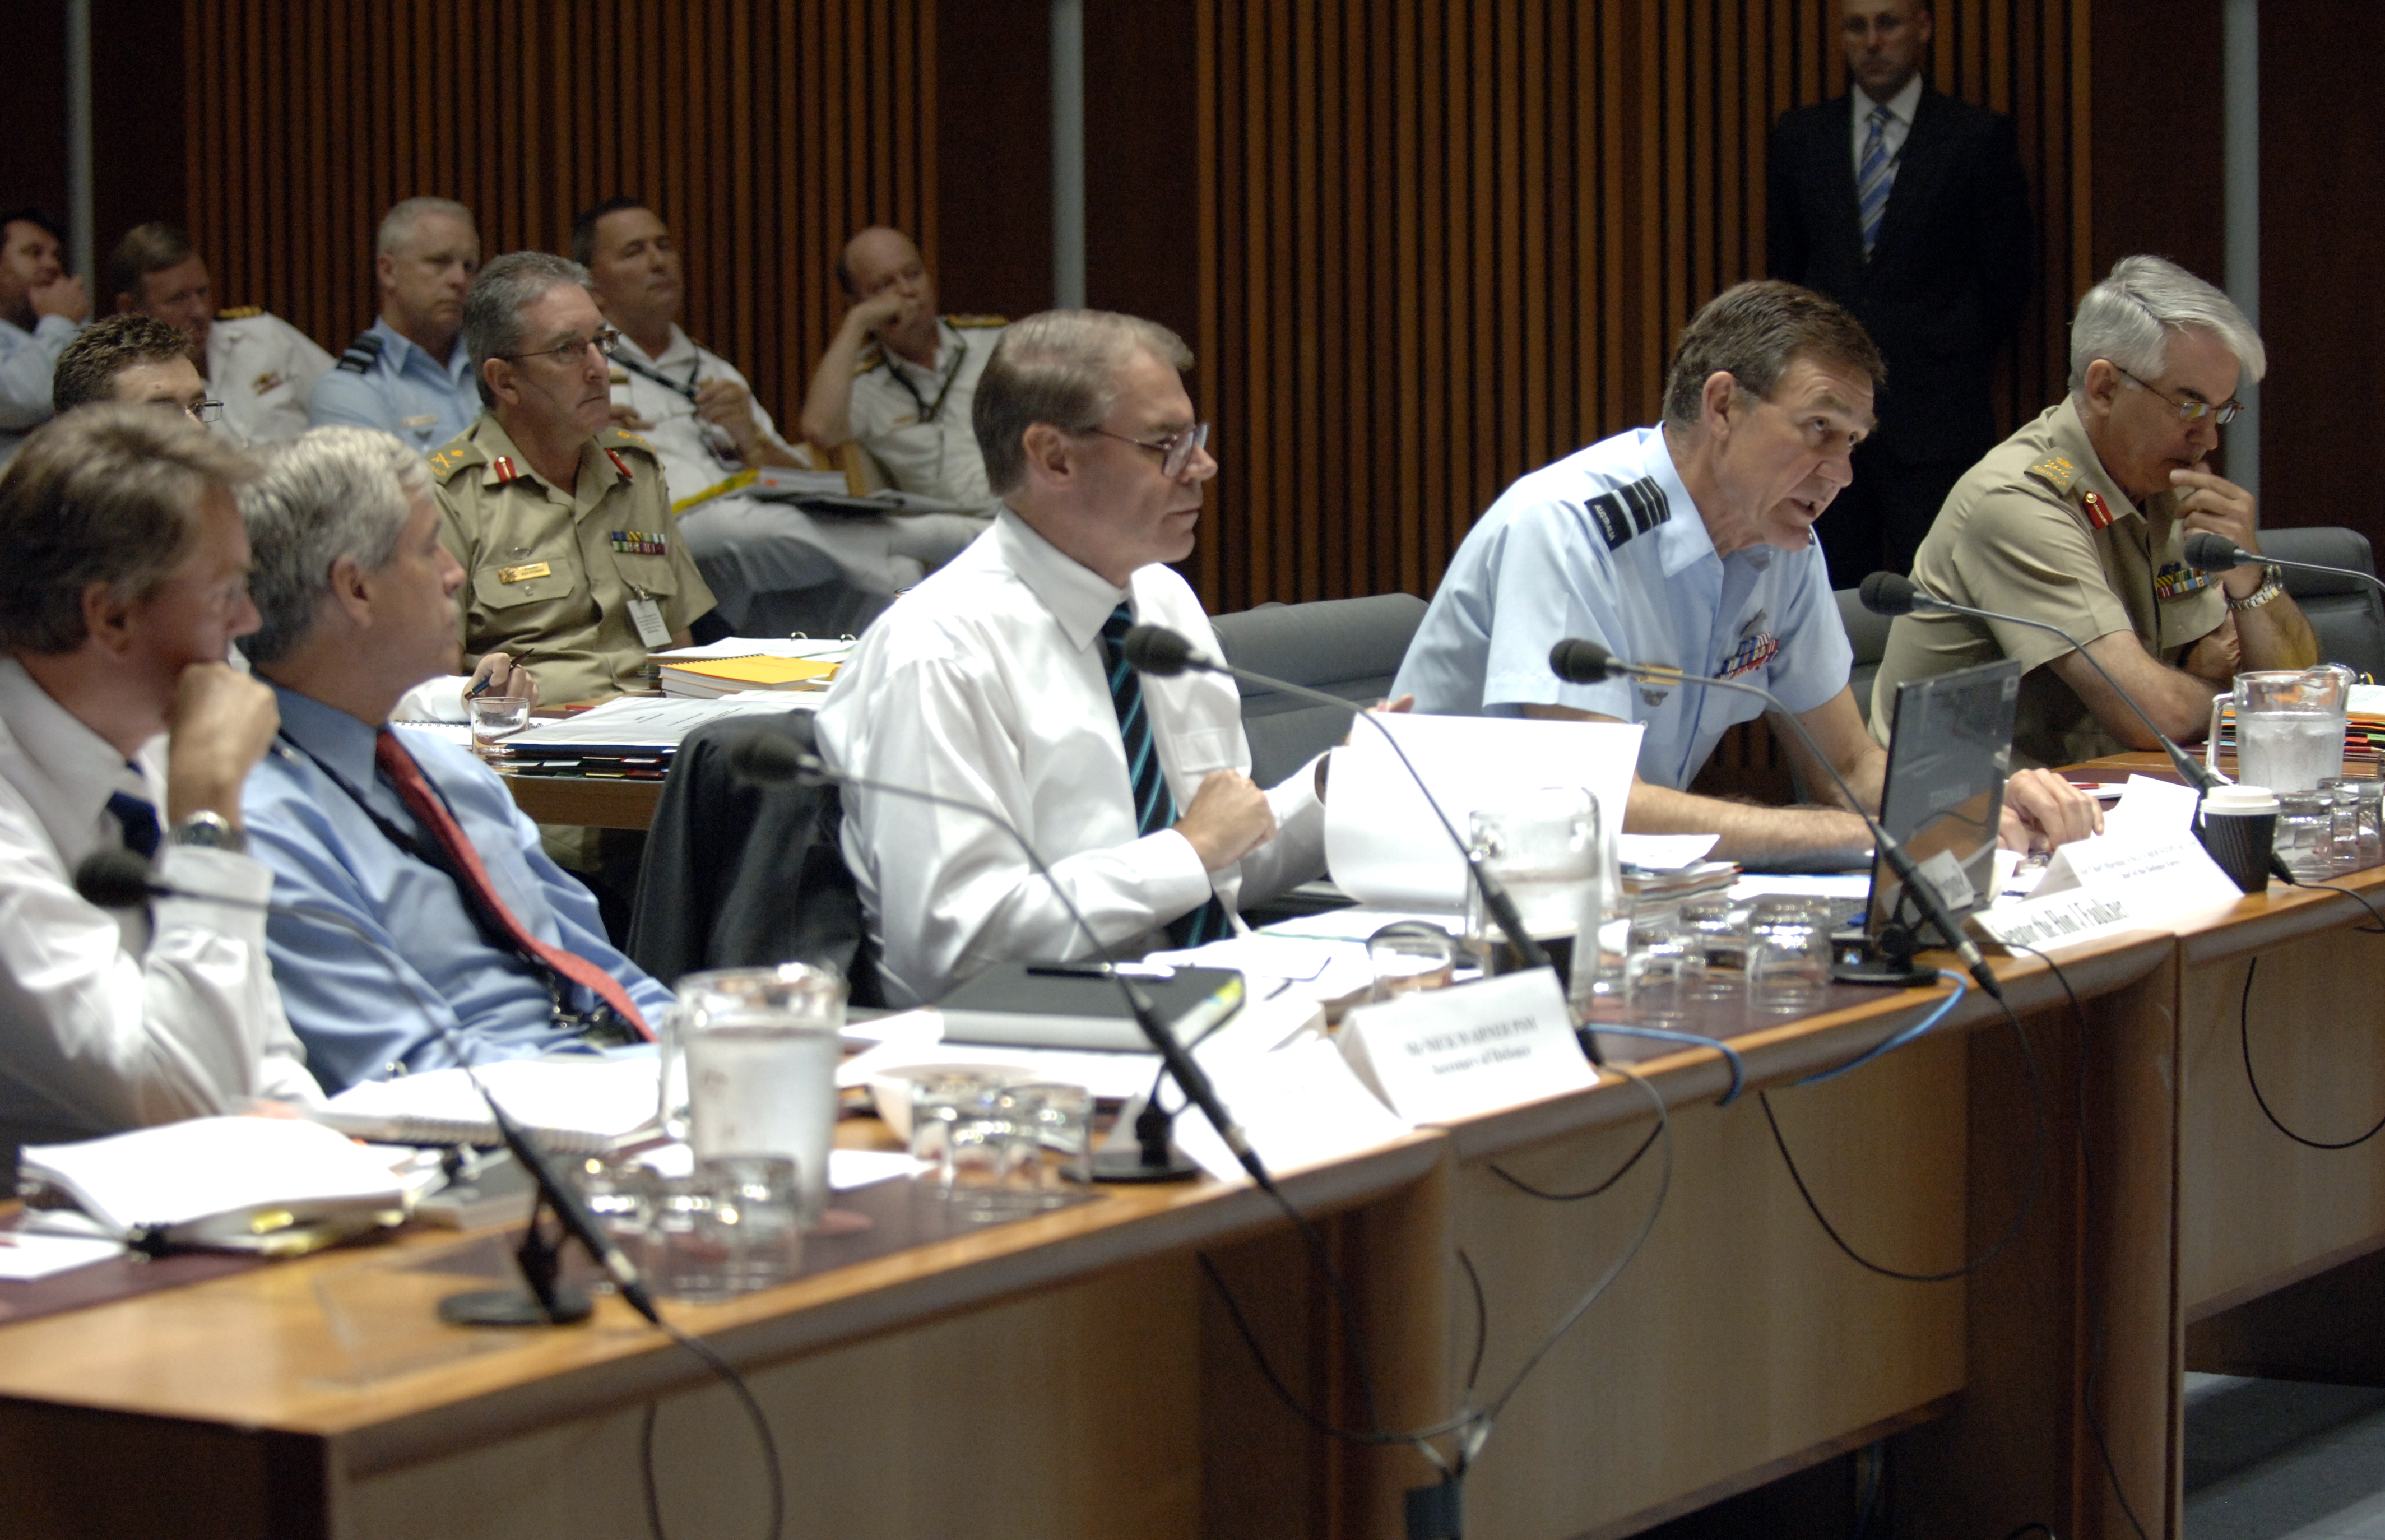 Standing Committee on Foreign Affairs, Defence and Trade, 25 February 2009. Seated at witness table facing camera L-R: Witnesses Phillip Prior and Nick Warner from the Department of Defence, Senator John Faulkner [Special Minister of State], Air Chief Marshal Angus Houston [Chief of the Defence Force] and Lieutenant General Ken Gillespie [Chief of Army]. DPS Auspic.